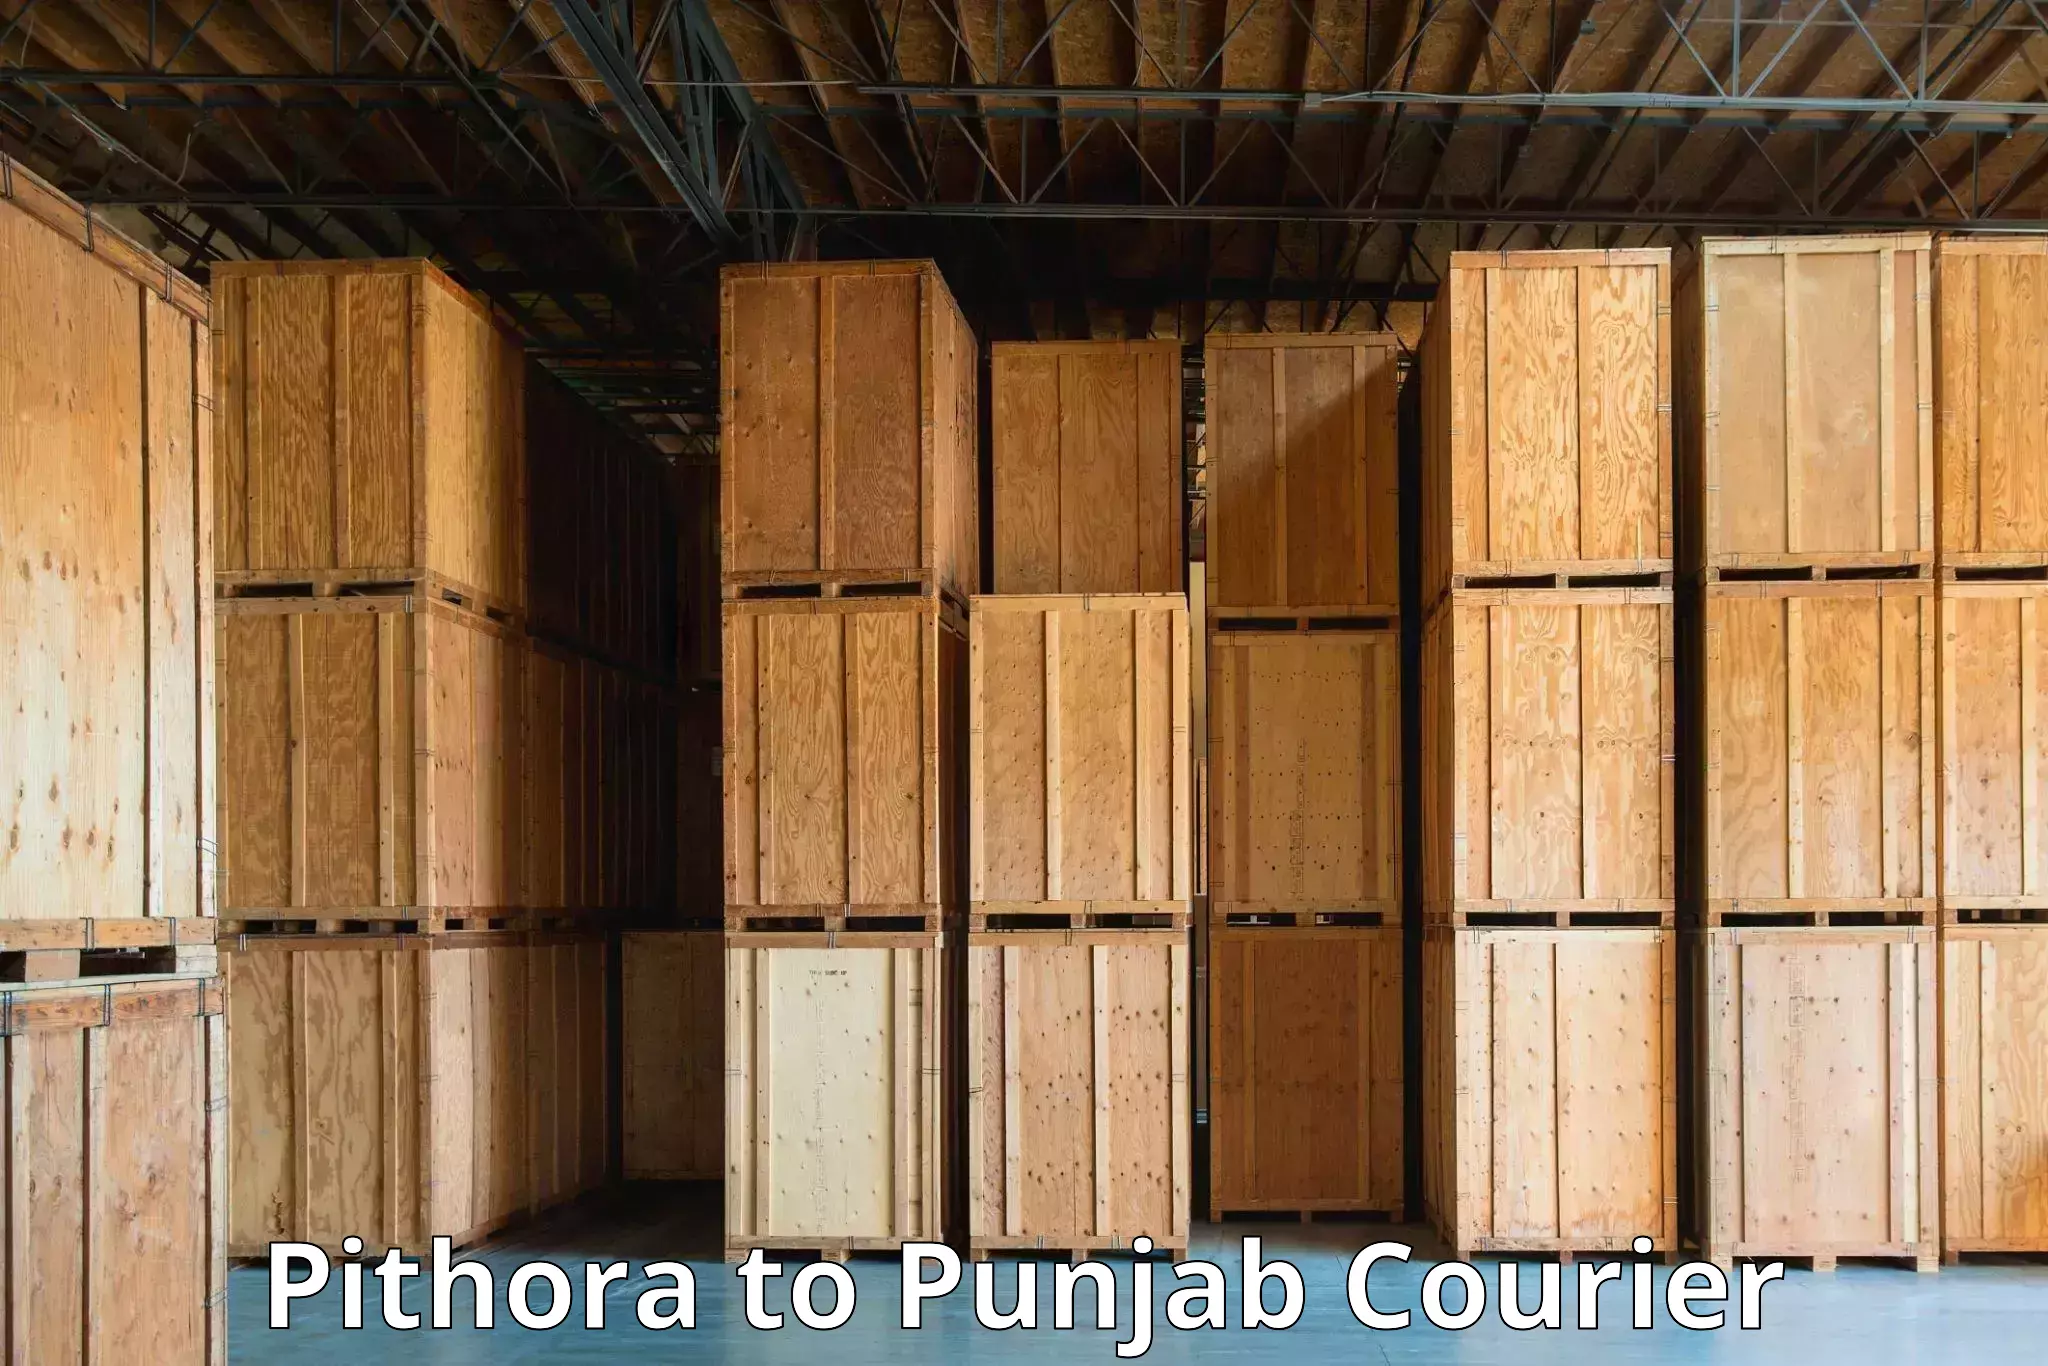 Easy access courier services Pithora to Jalalabad